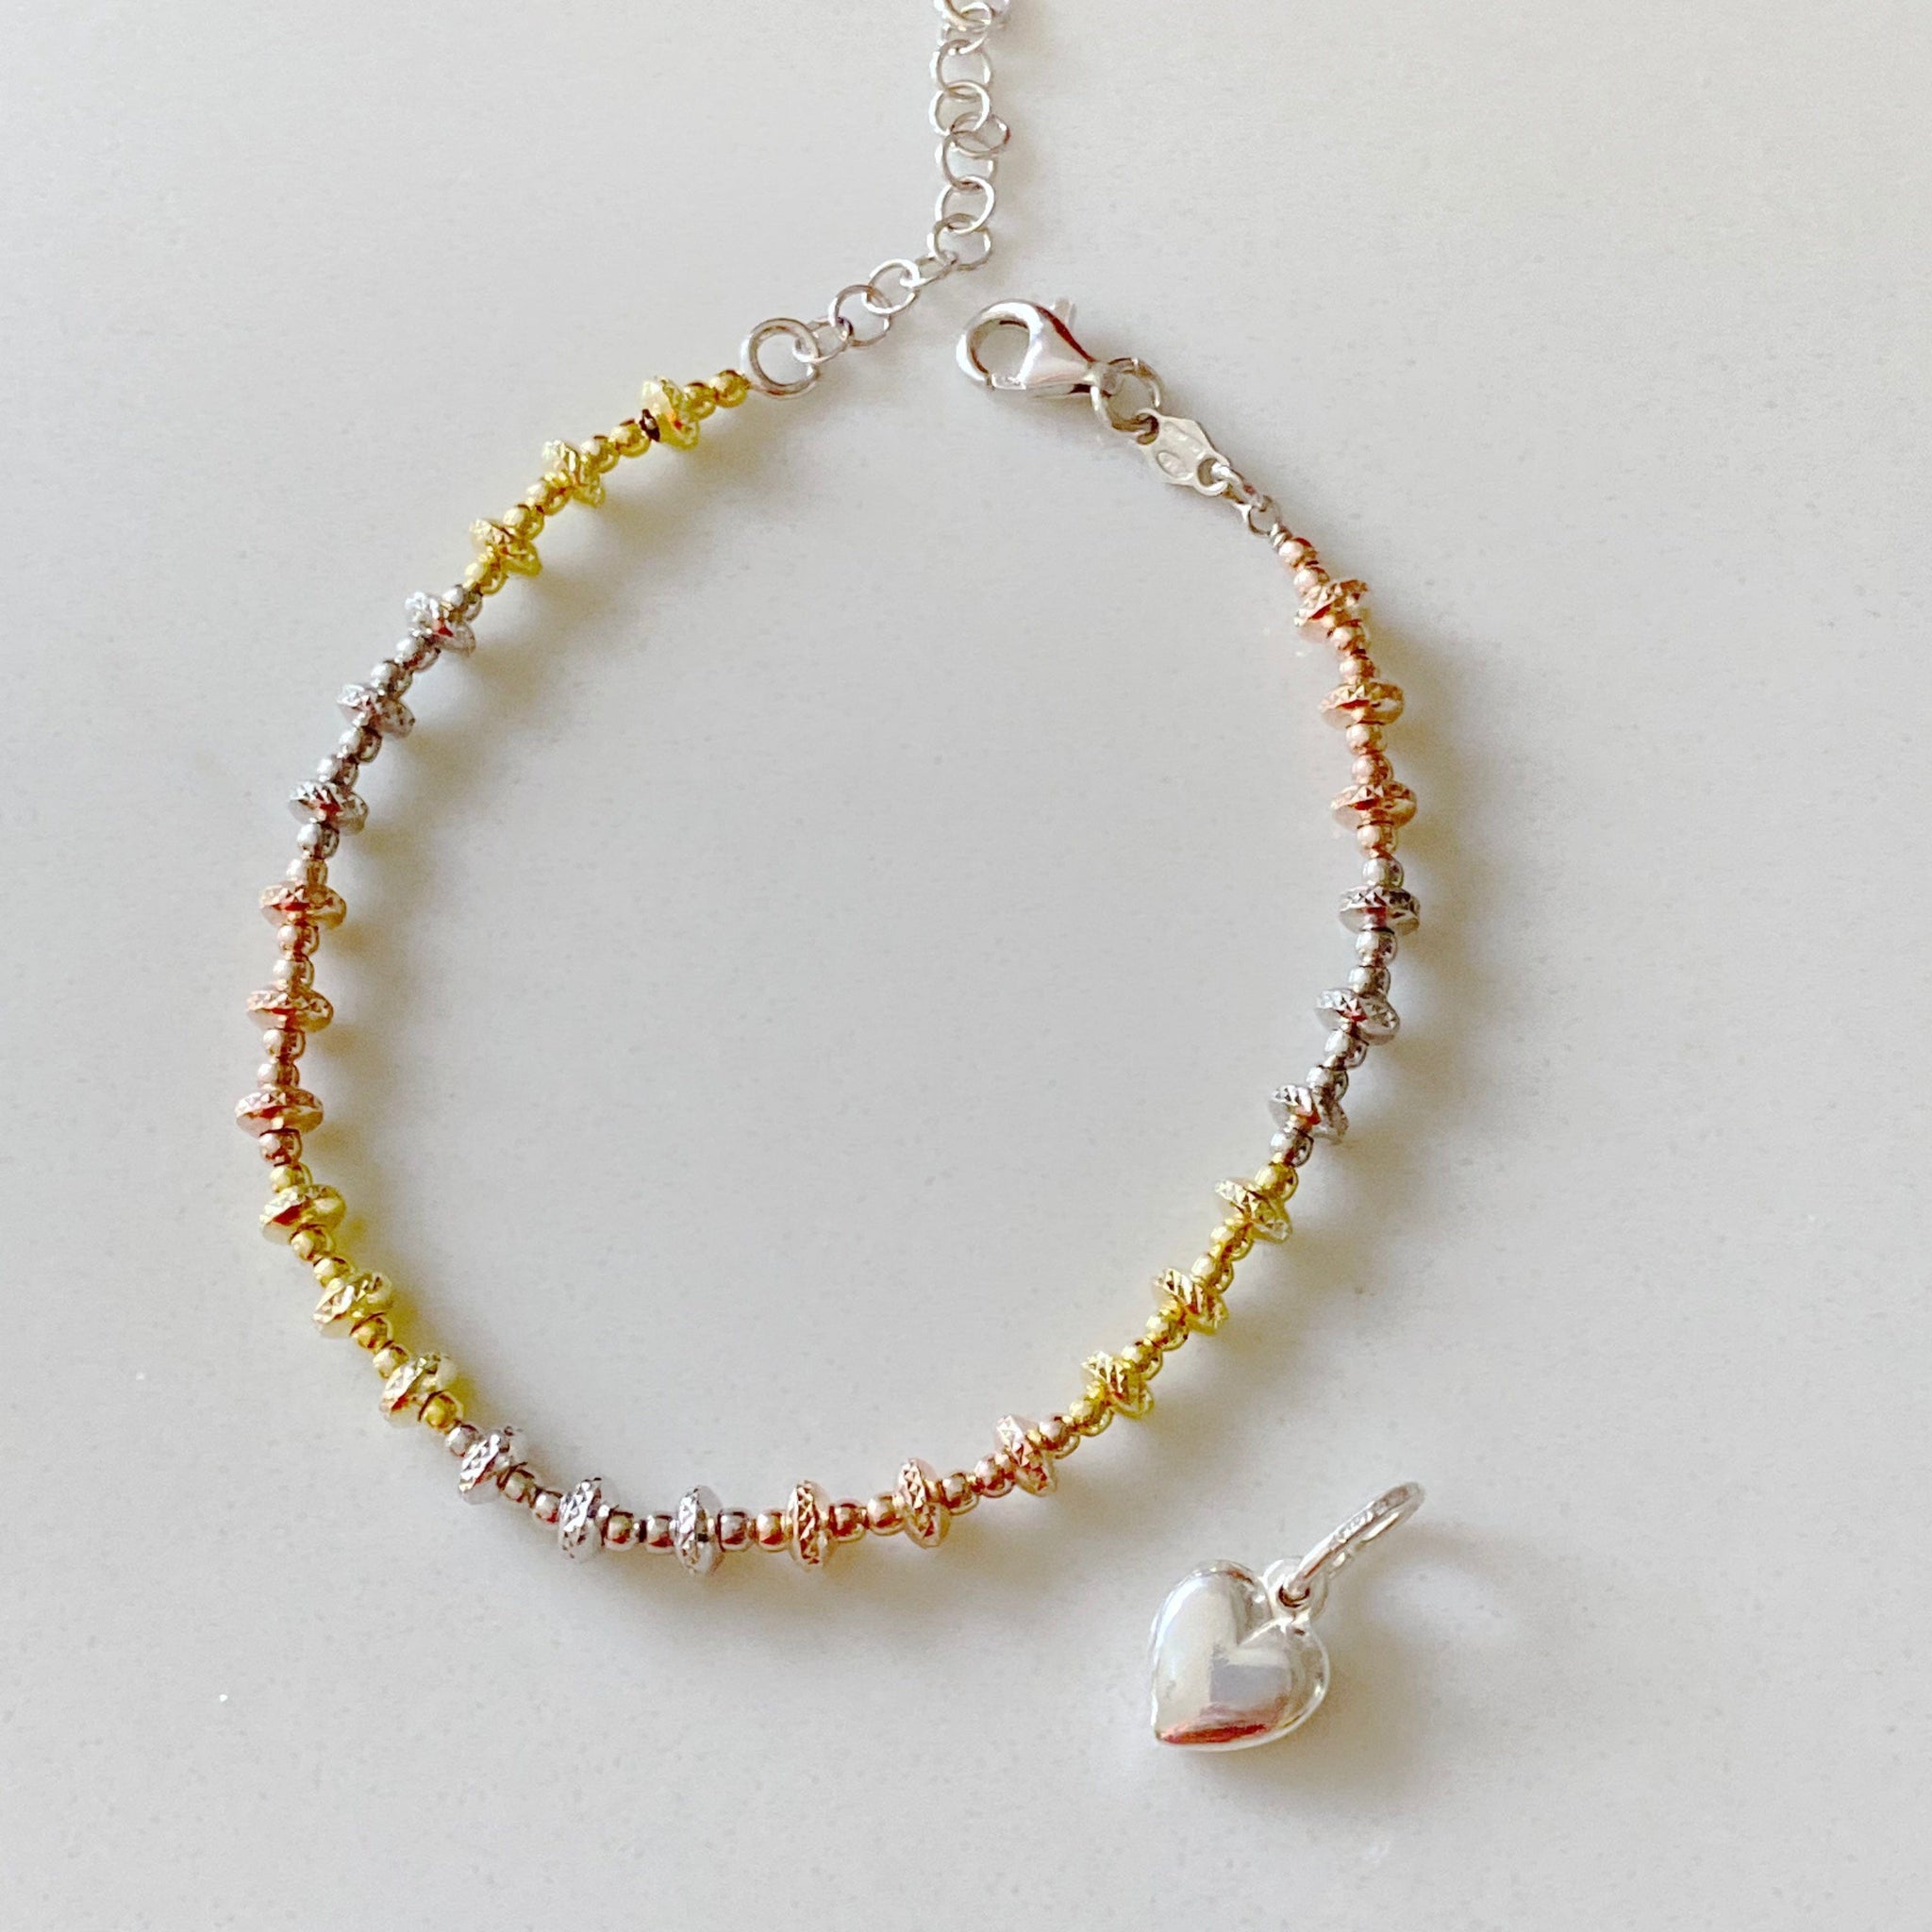 Tri Color Faceted Bead Bracelet with Removable Heart Charm